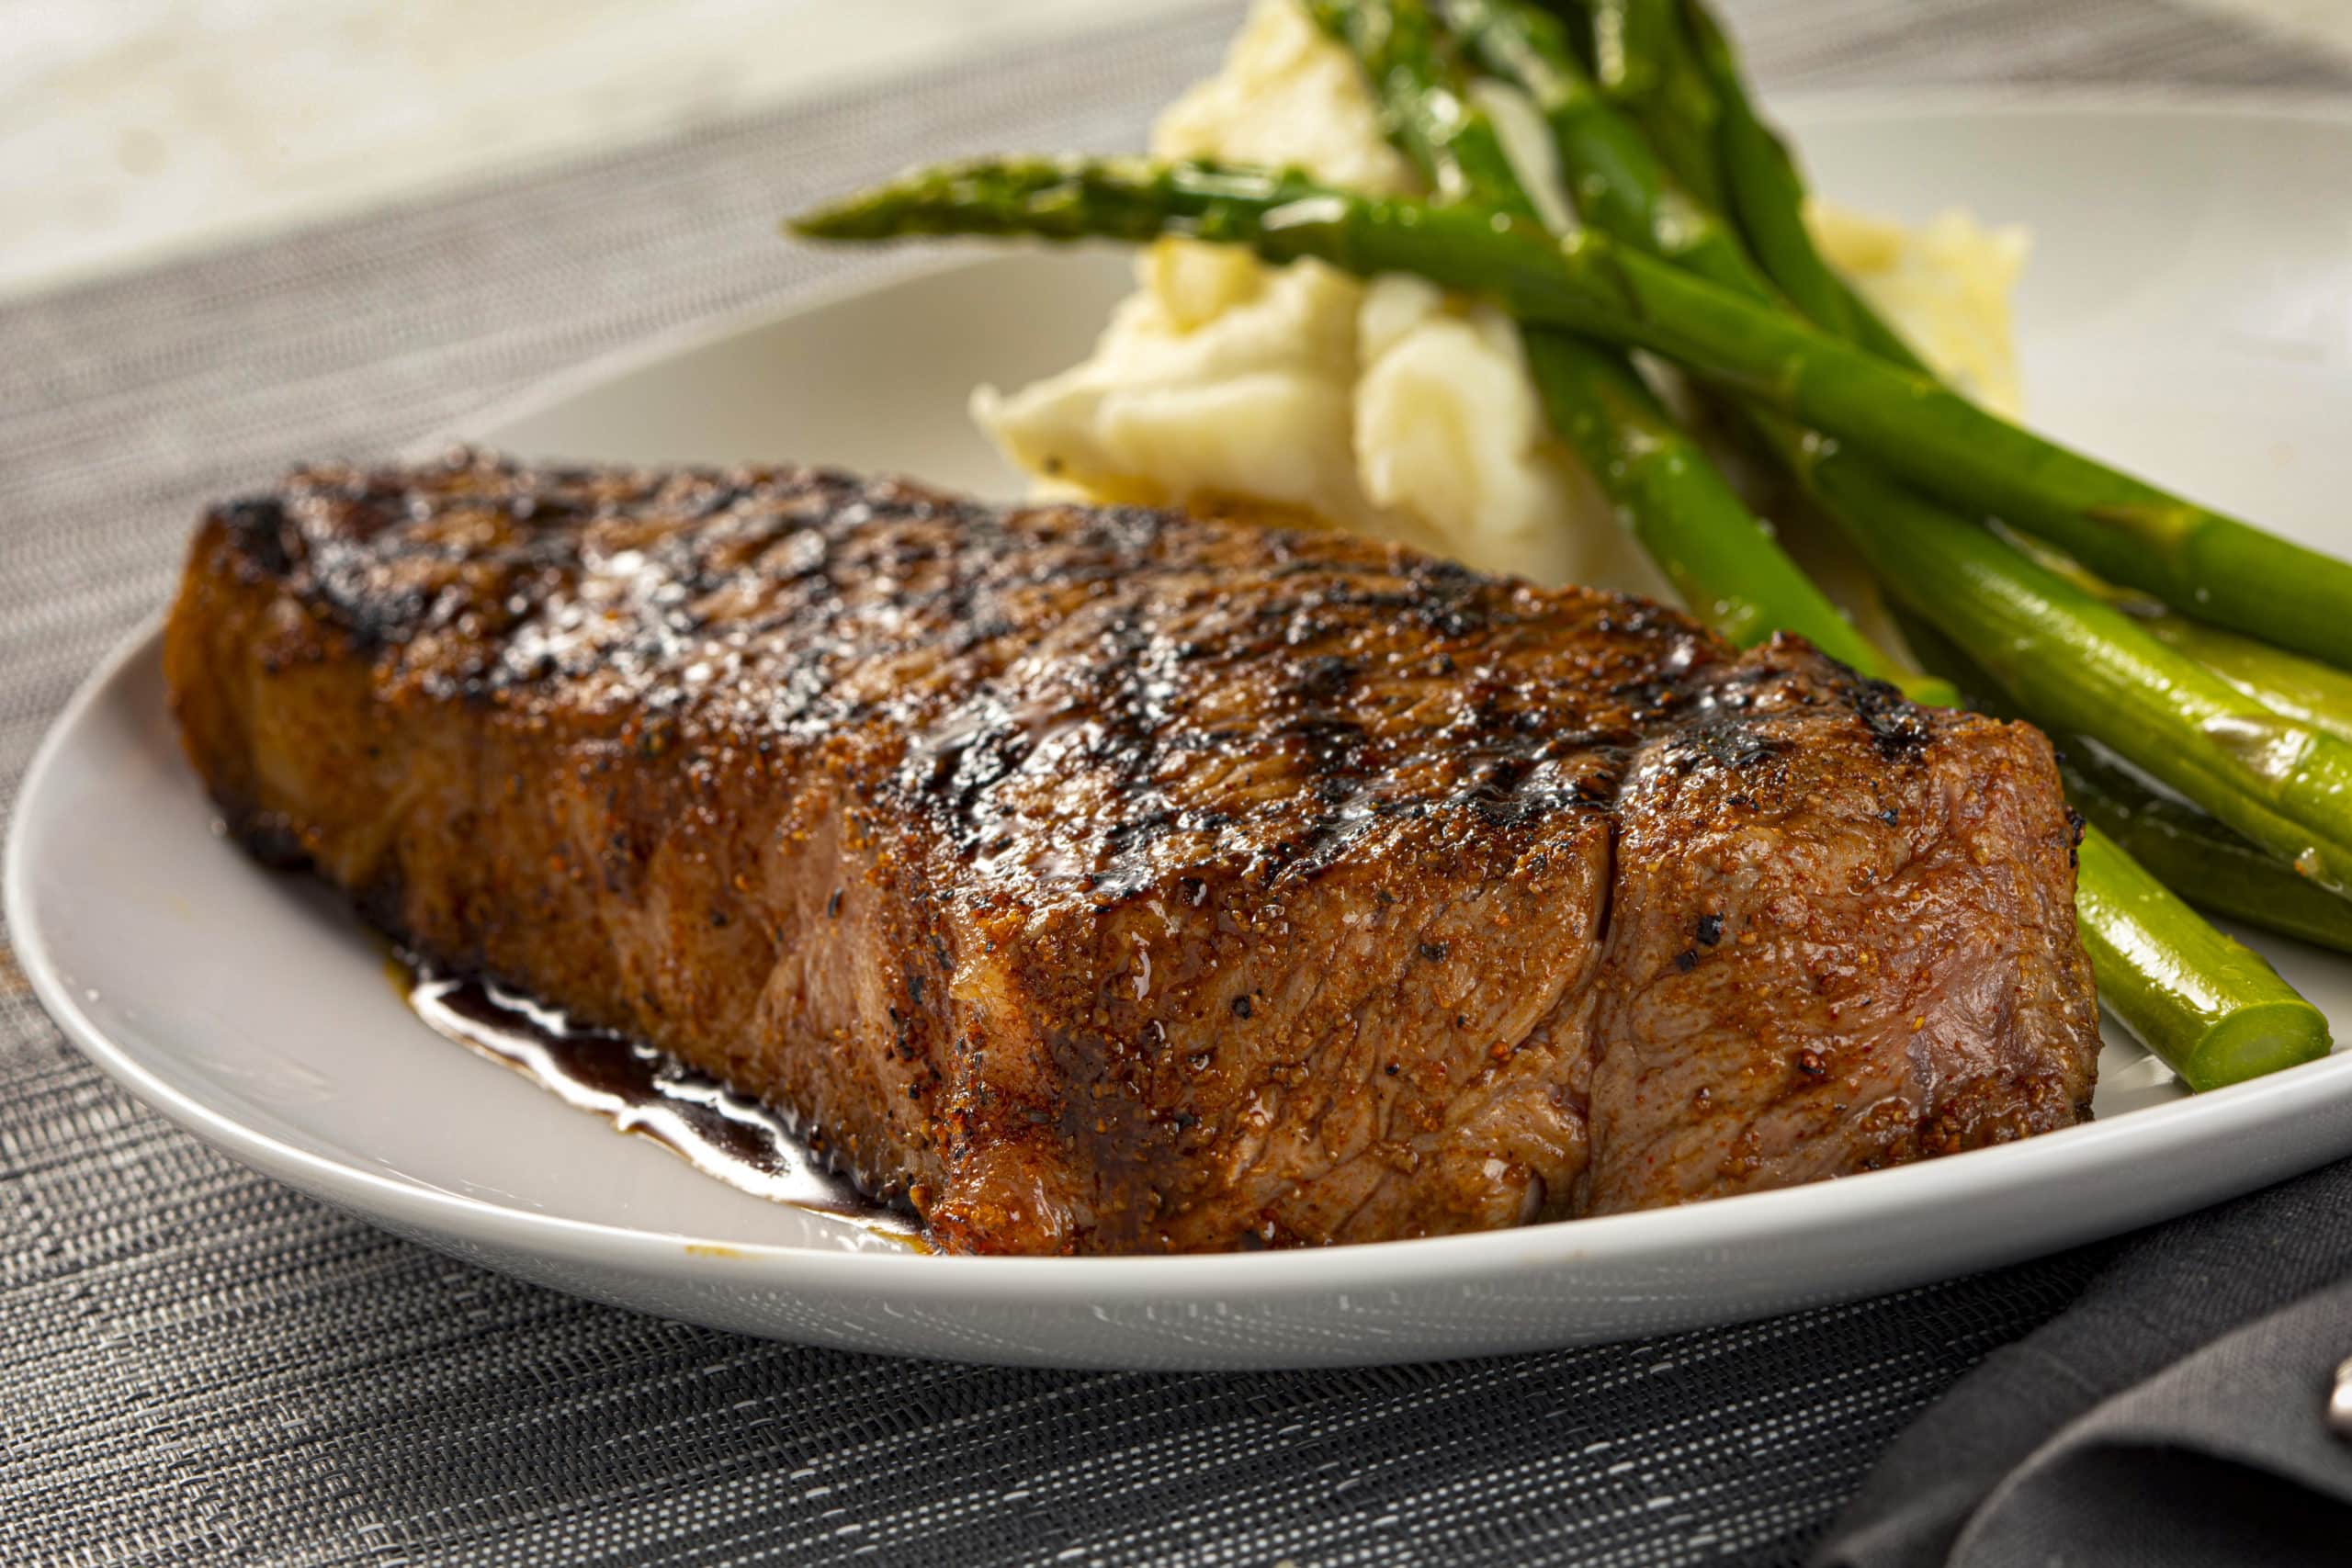 Brio's New York strip steak with mashed potatoes and asparagus on a plate